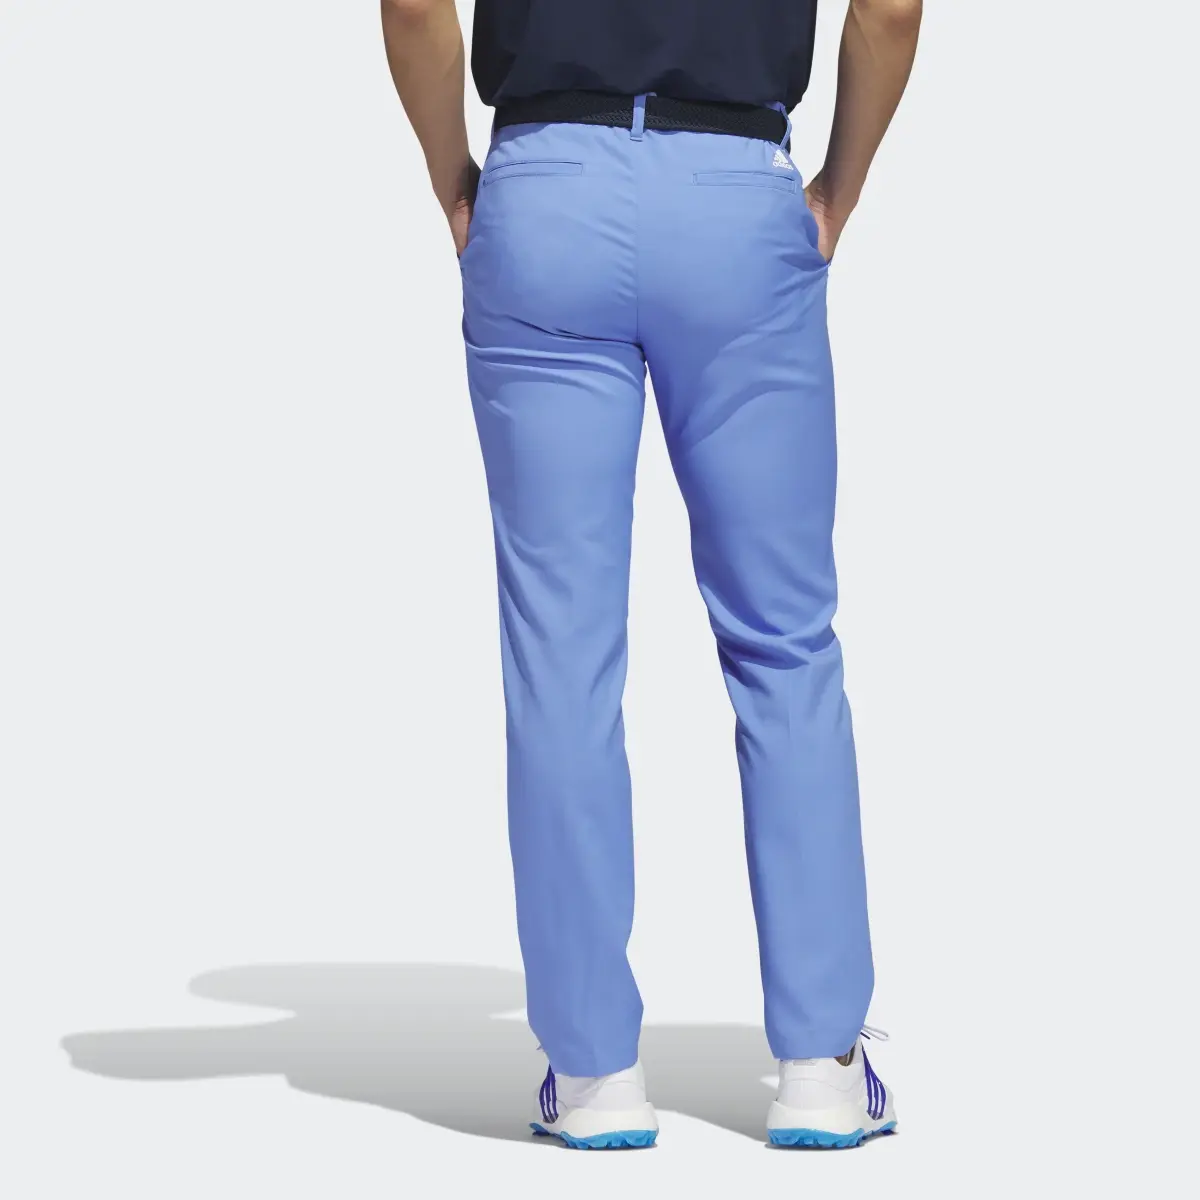 Adidas Ultimate365 Tapered Pants. 2